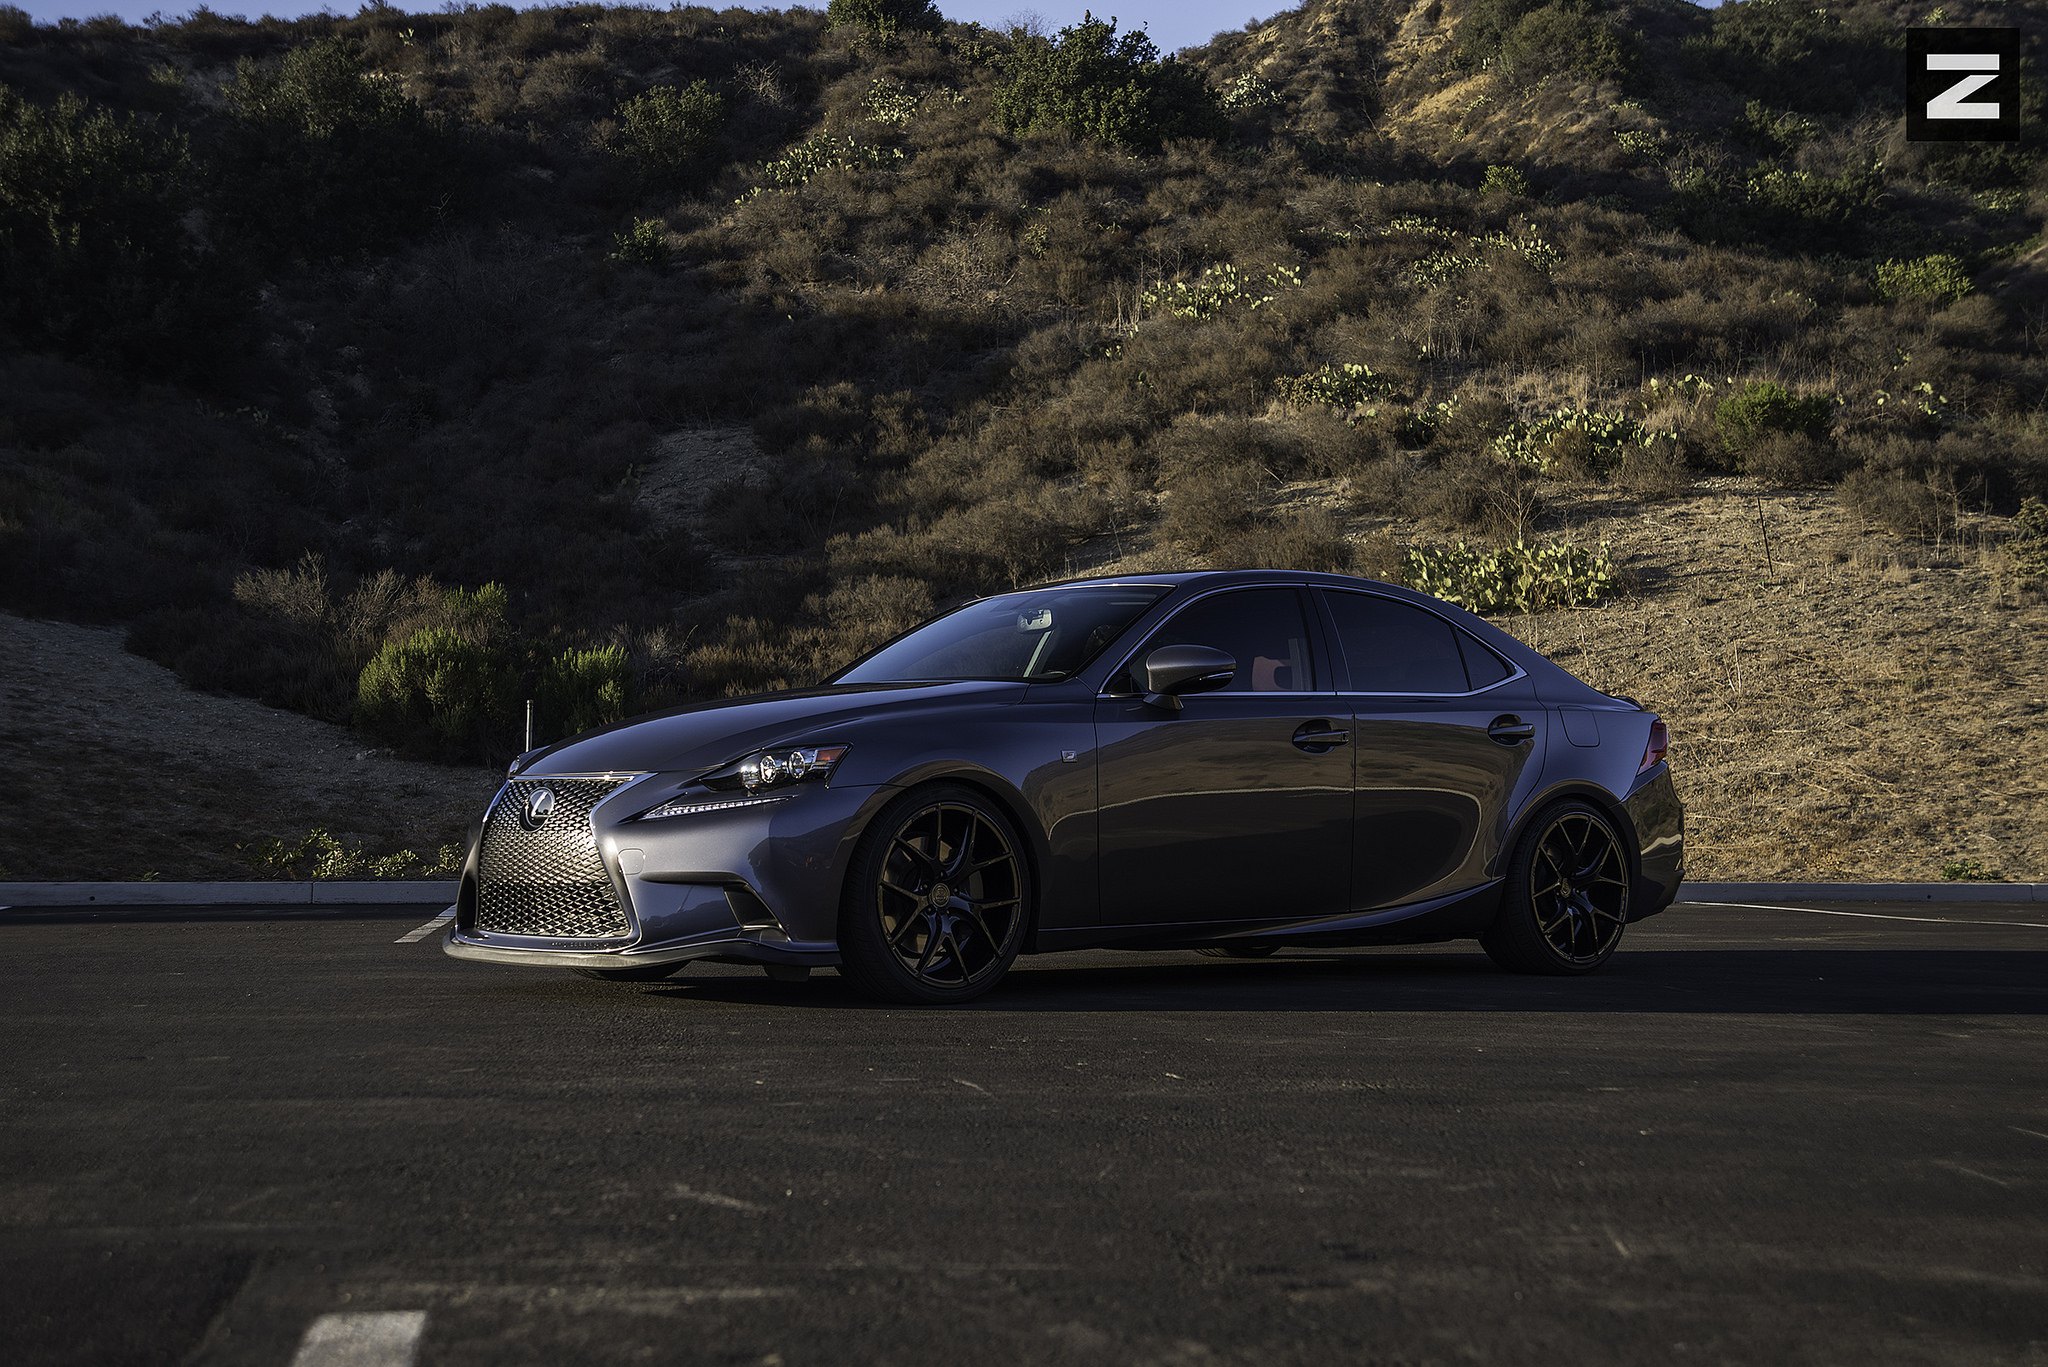 Gray Lexus IS 350 with Custom Front Lip - Photo by Zito Wheels